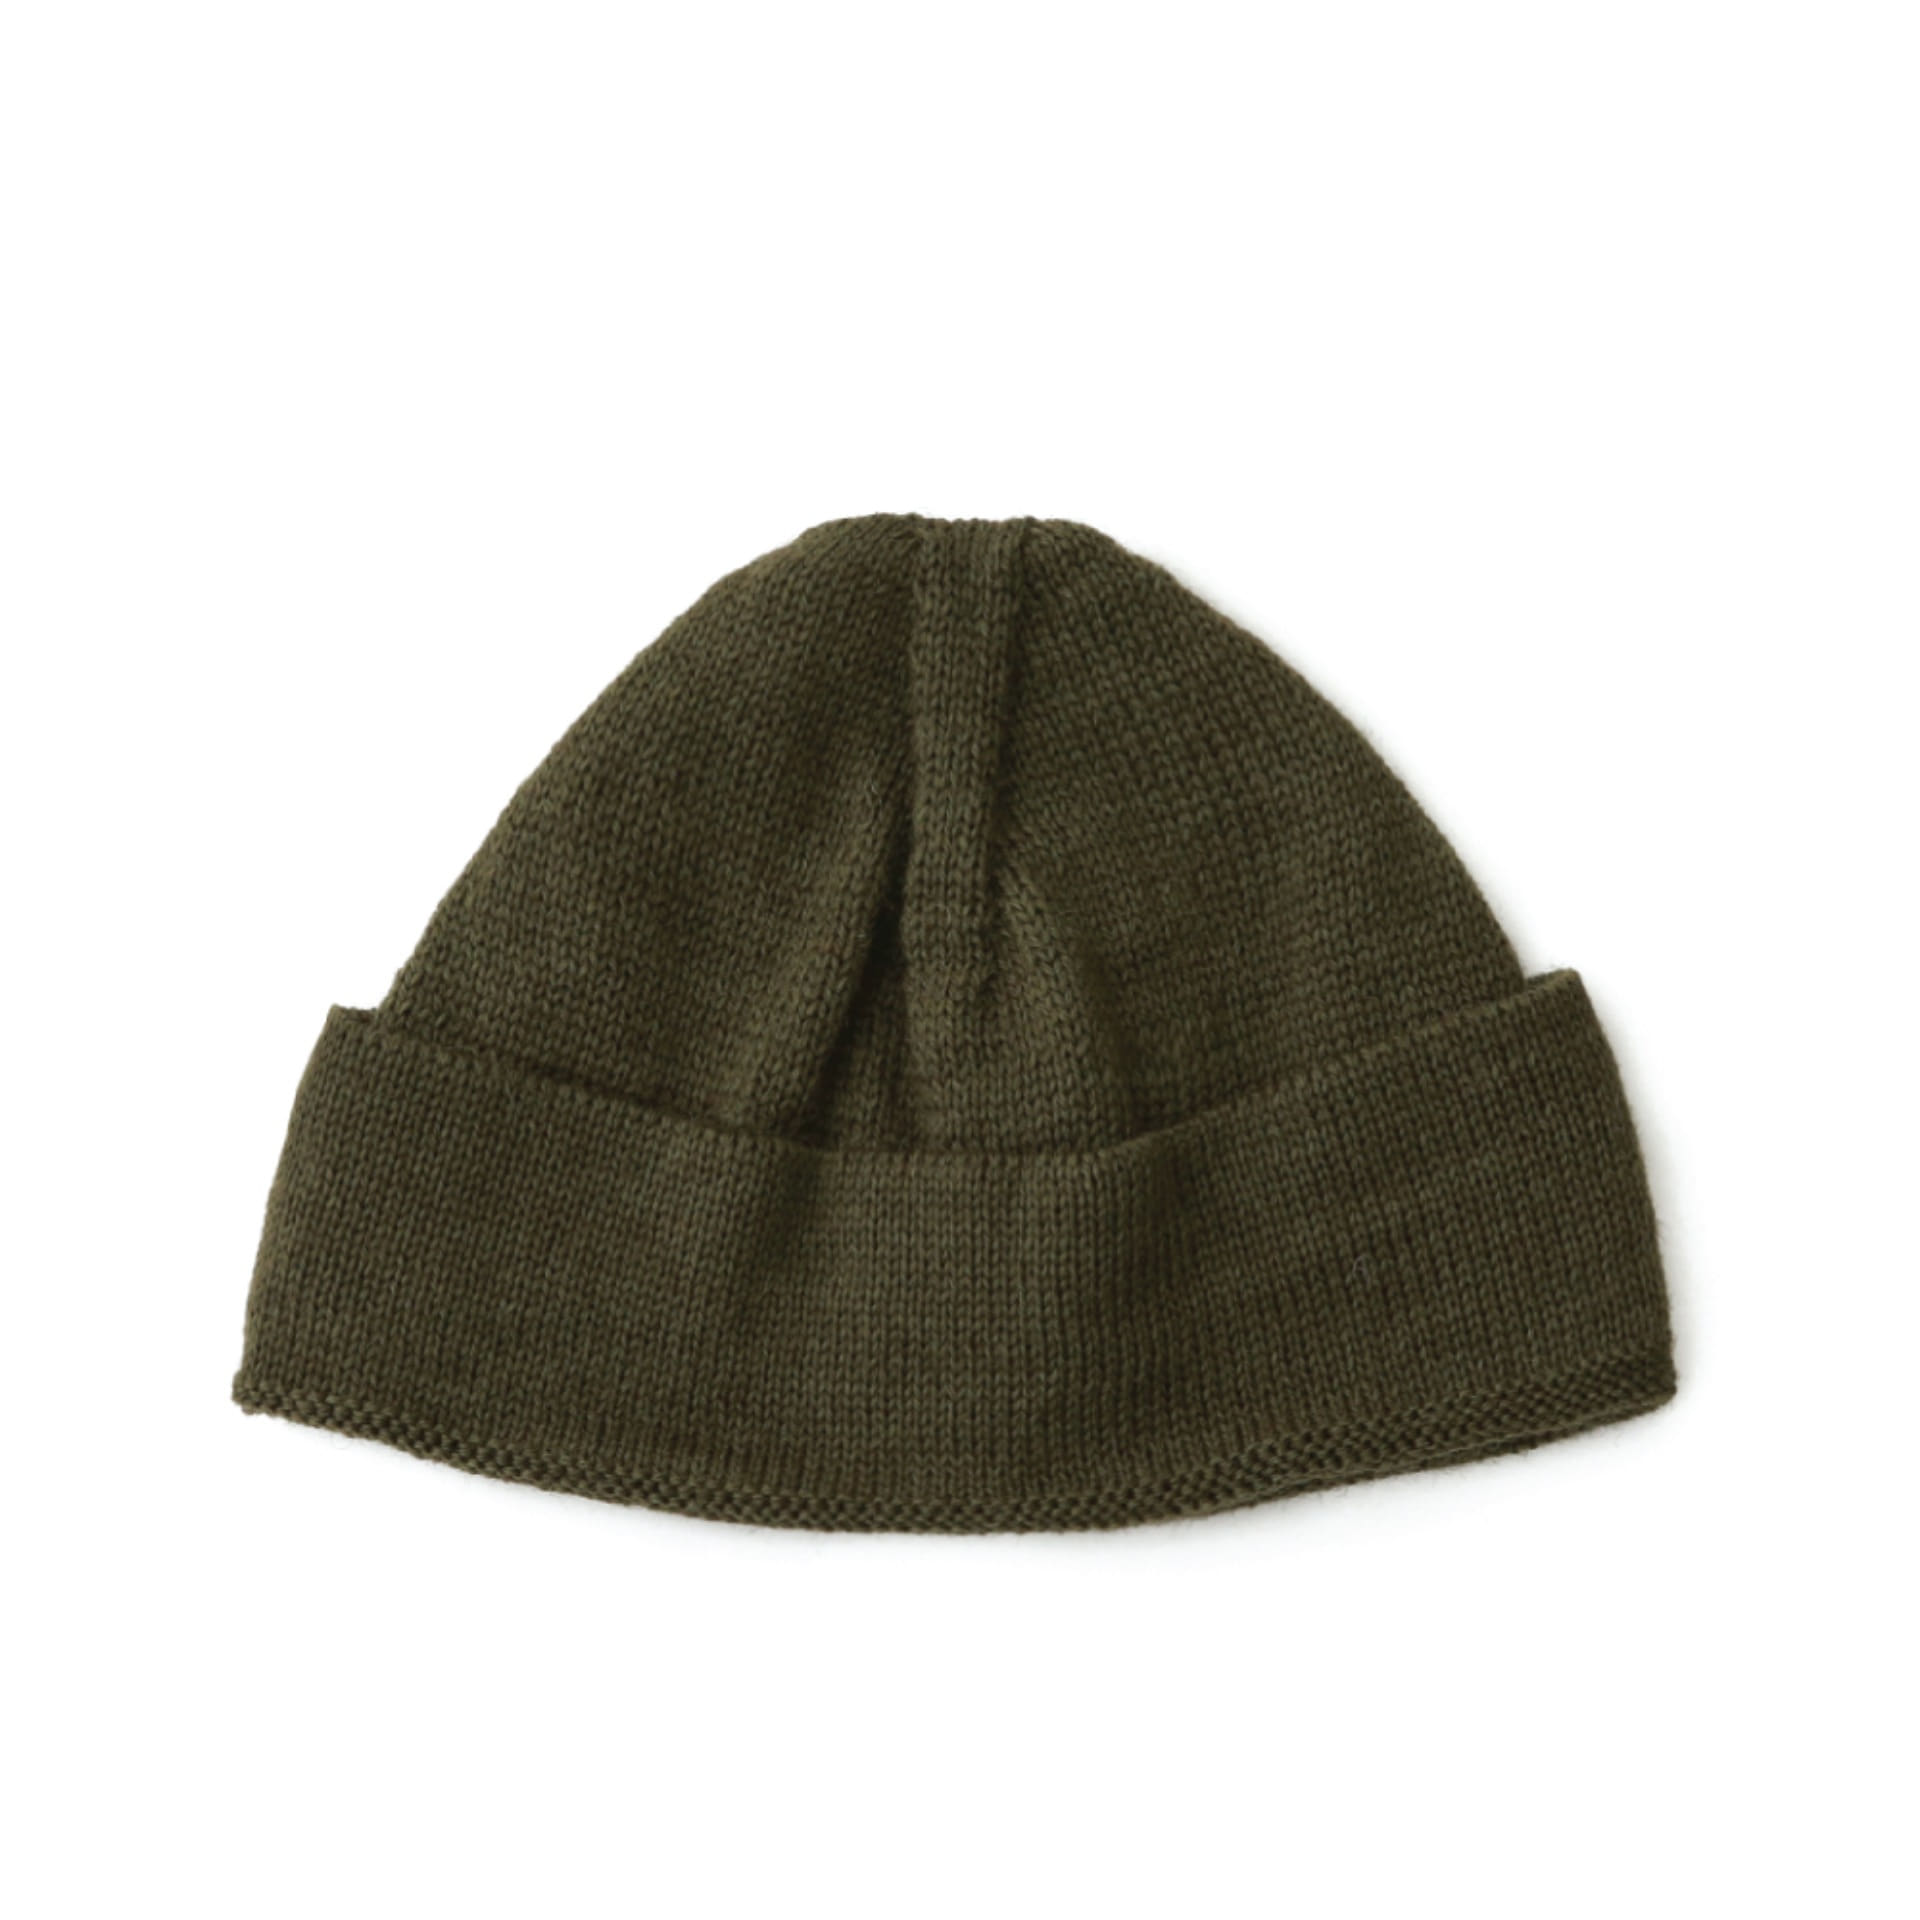 WATCH CAP (US ARMY OLIVE)